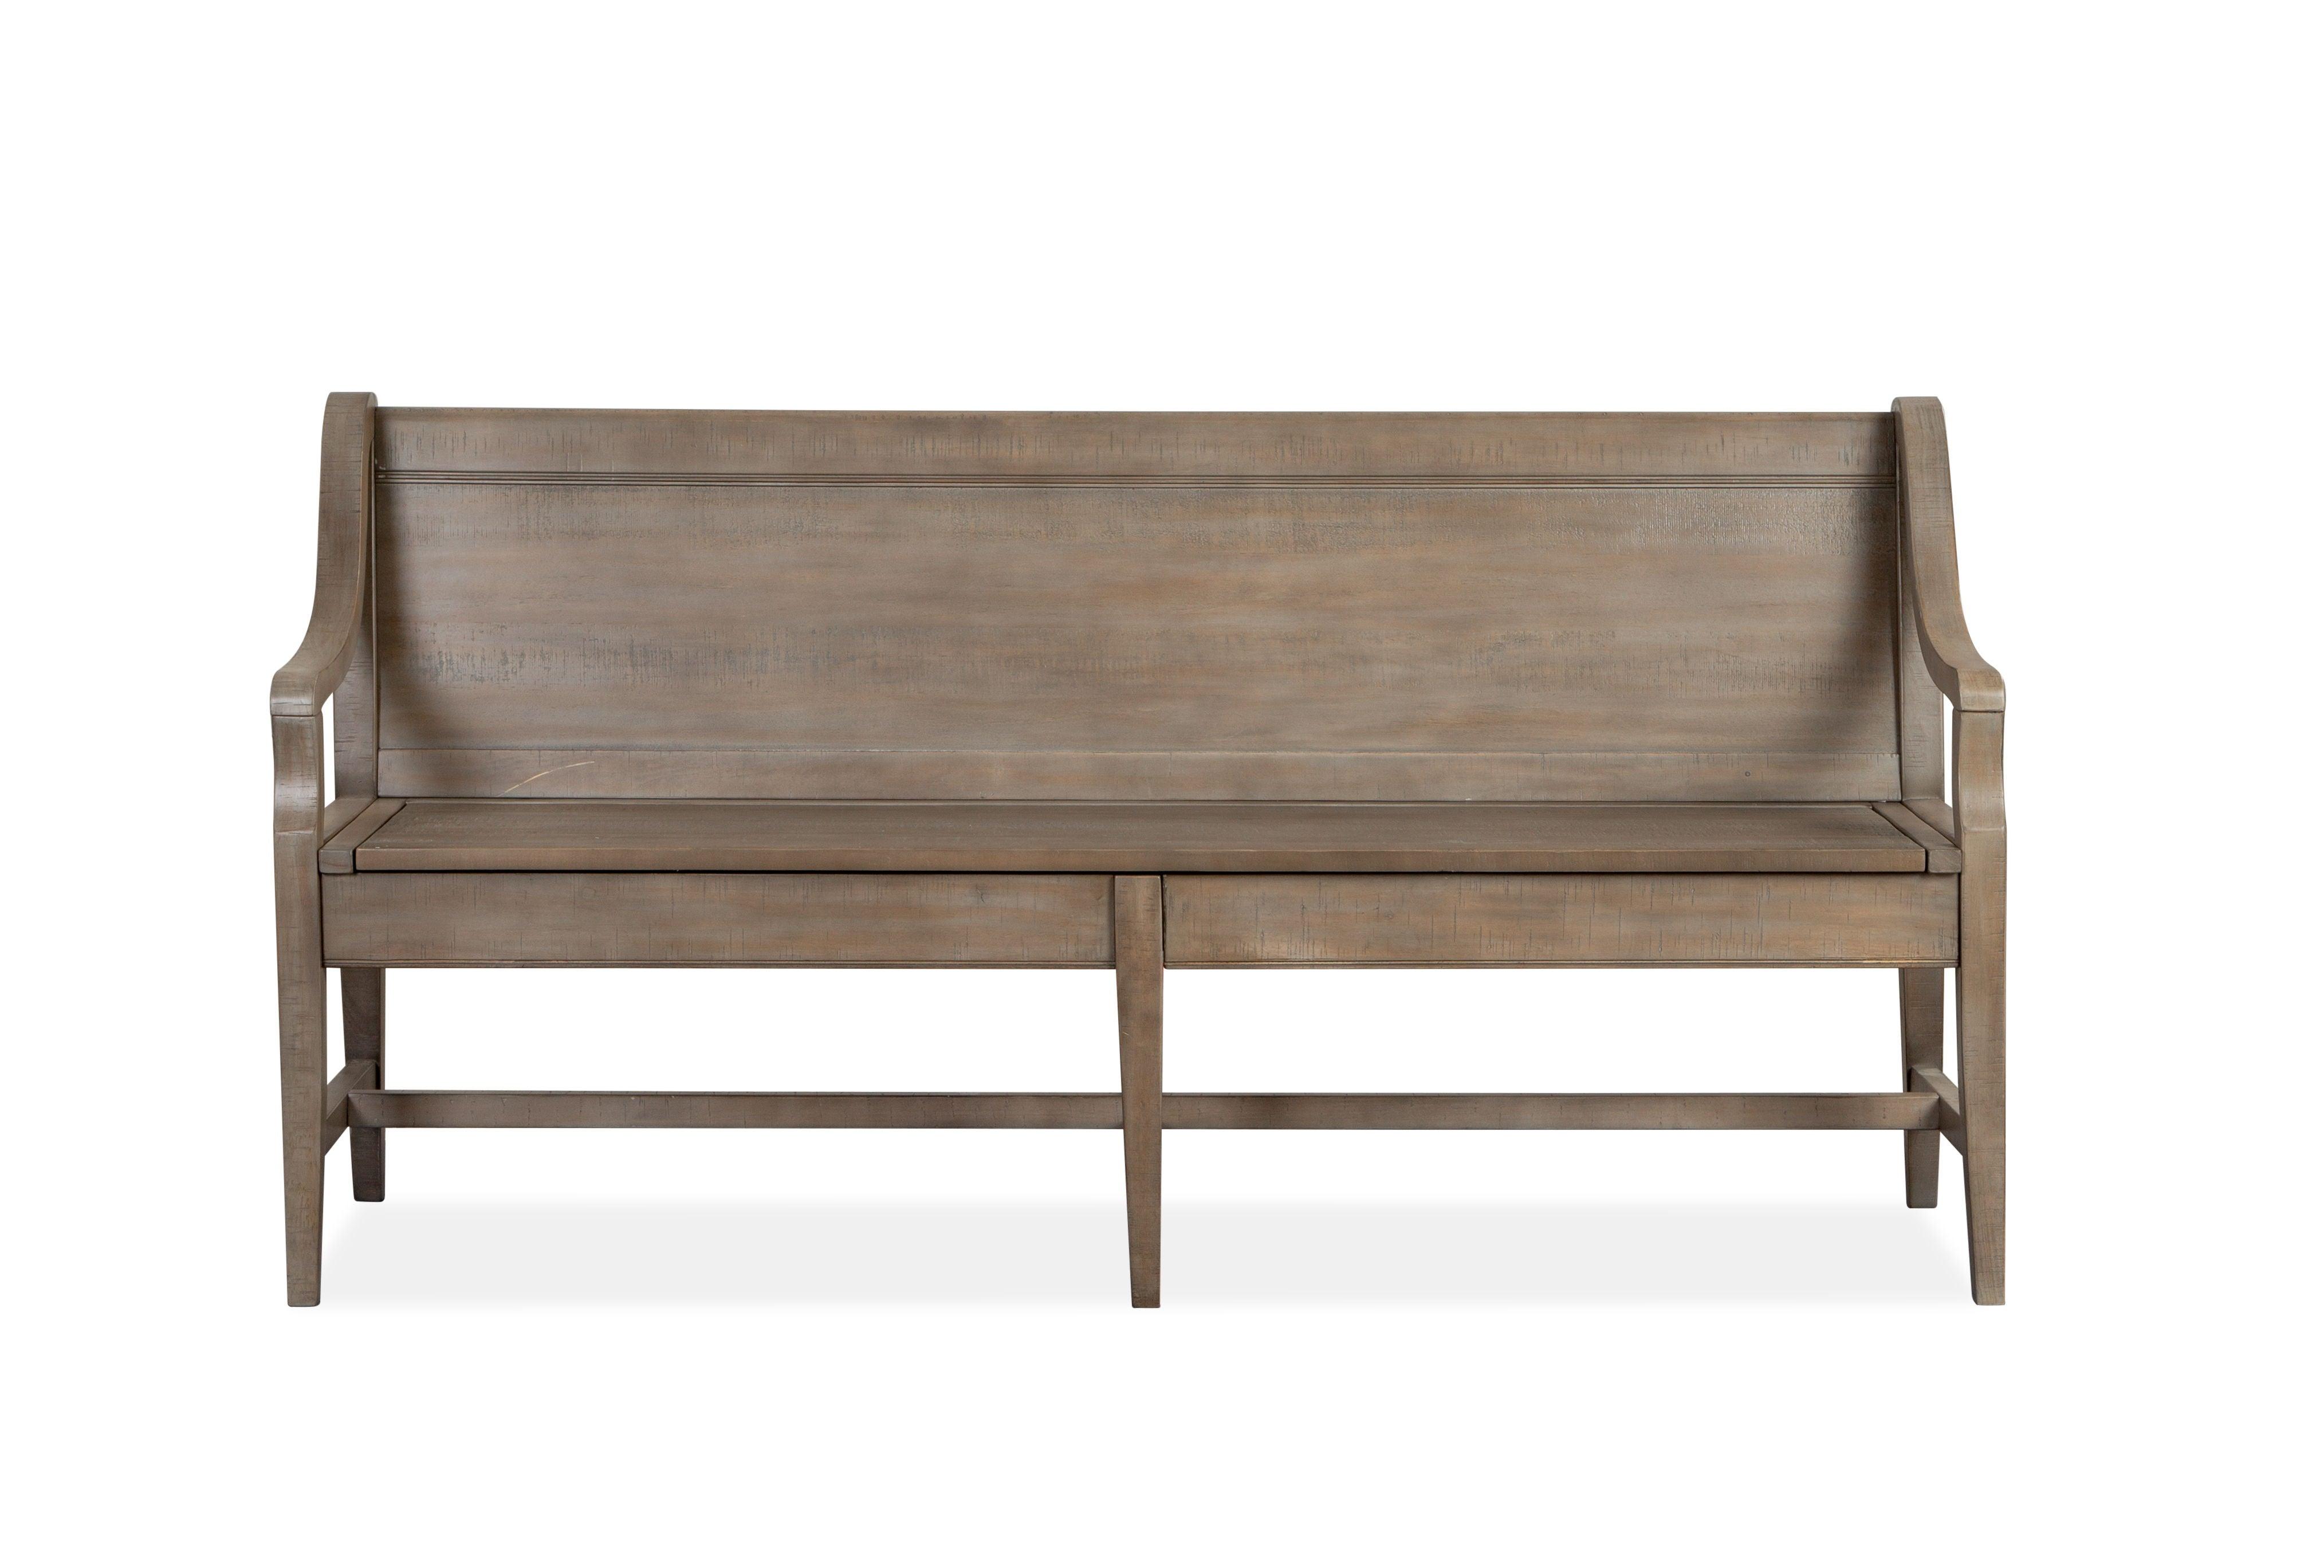 Magnussen Furniture - Paxton Place - Bench With Back - Dovetail Grey - 5th Avenue Furniture